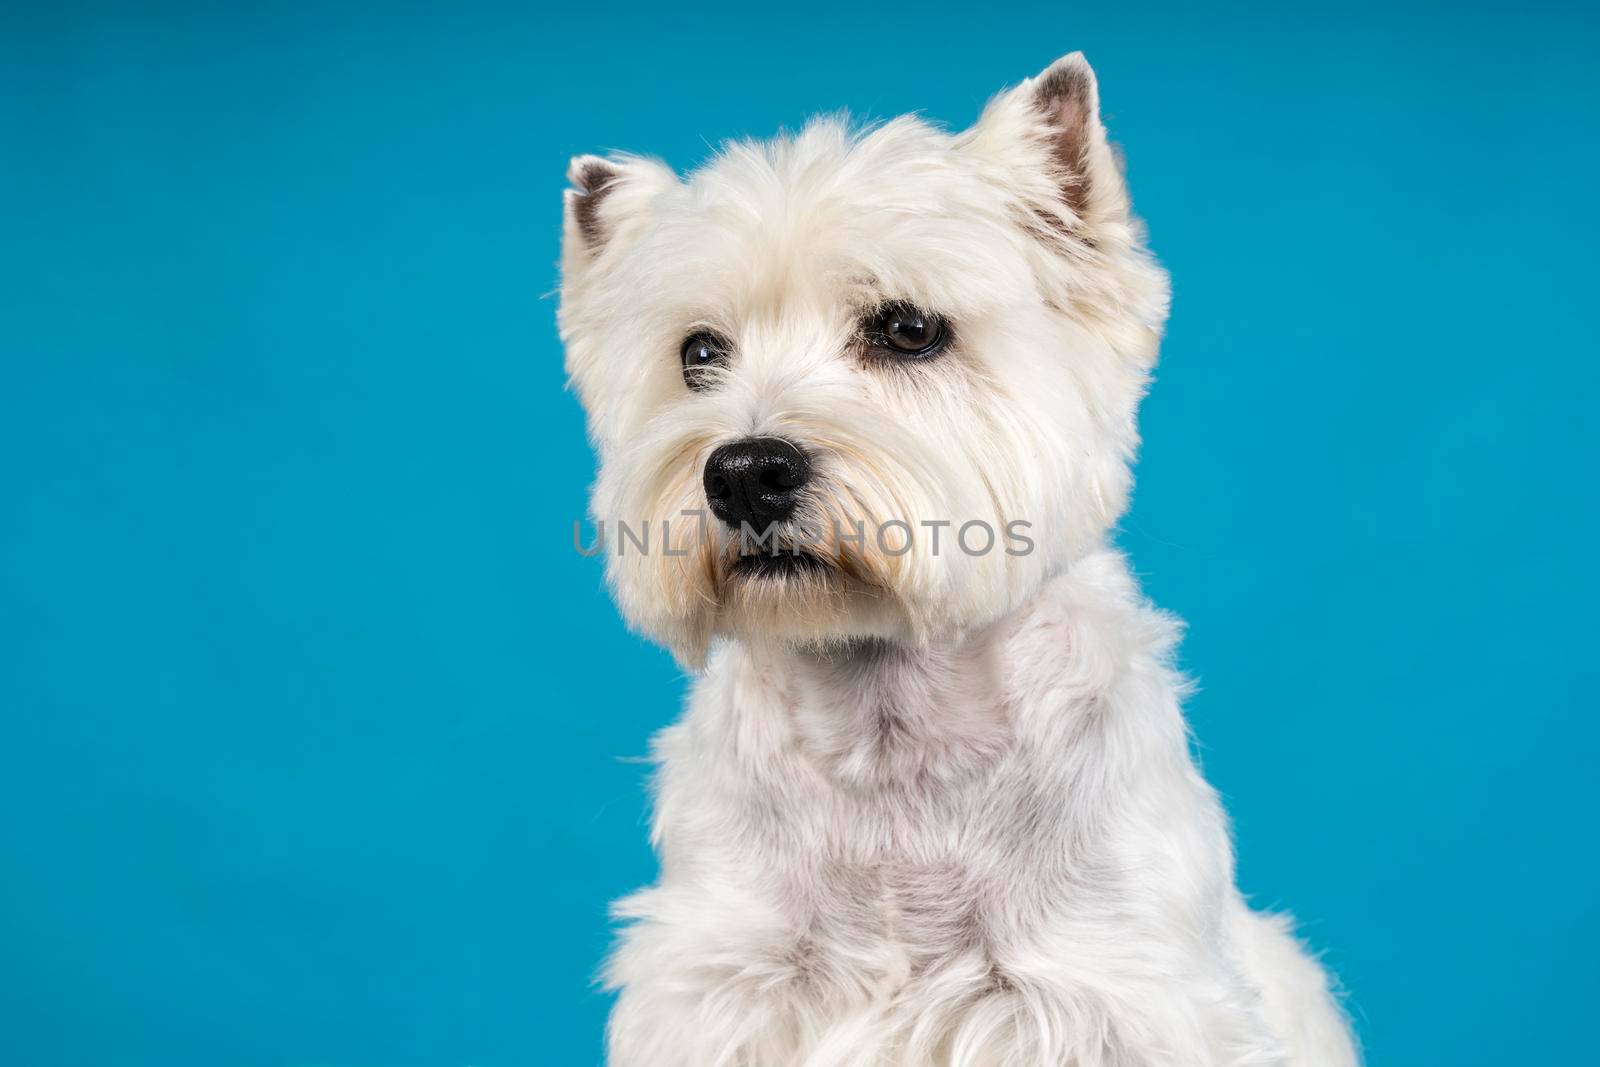 Portrait of a White West Highland Terrier Westie sitting looking at camera isolated on a baby blue background by LeoniekvanderVliet